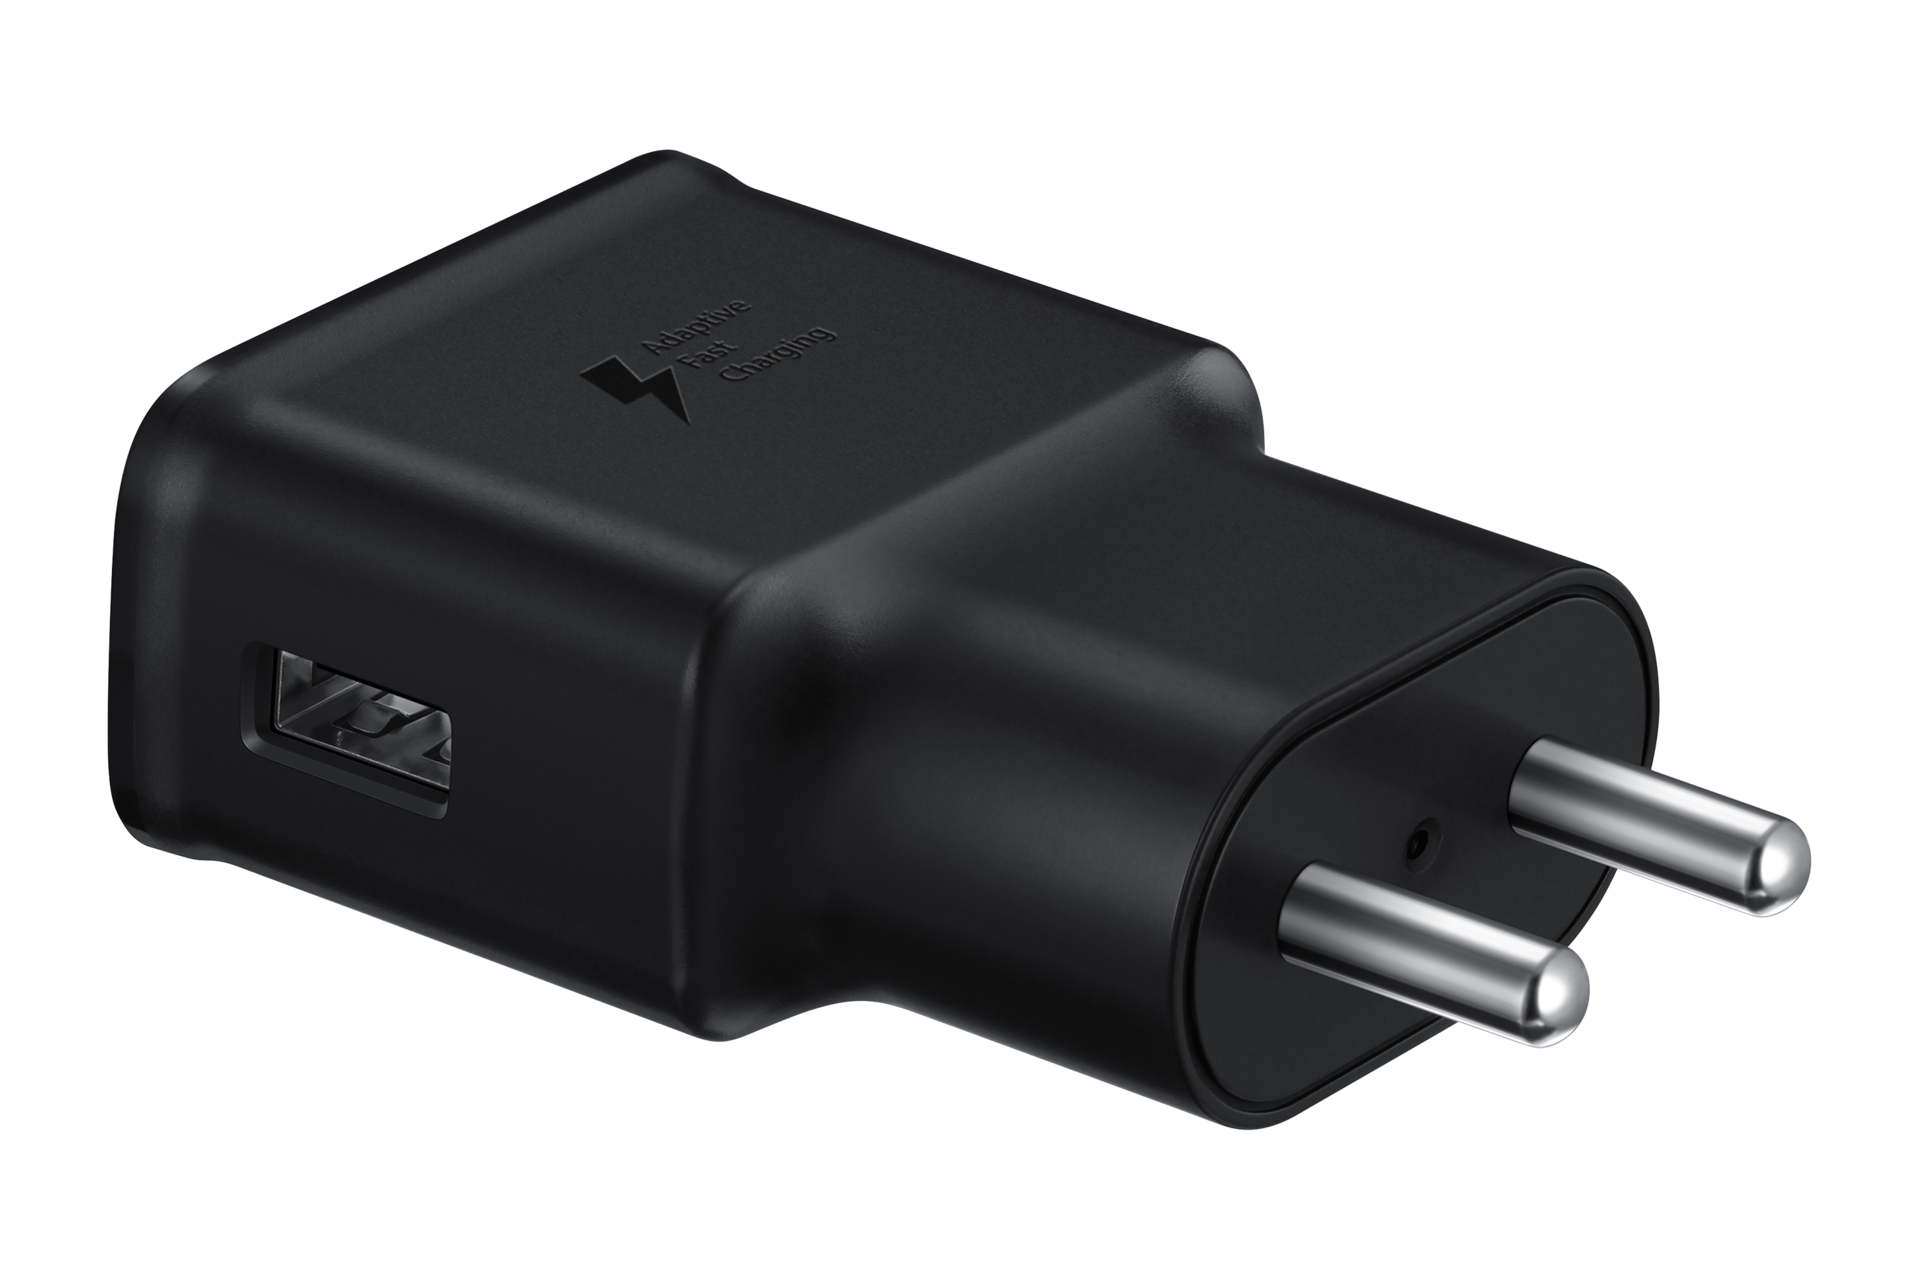 https://images.samsung.com/is/image/samsung/p6pim/in/ep-ta200nbegin/gallery/in-15w-traveladapter-epta200-ep-ta200nbegin-372452029?$650_519_PNG$